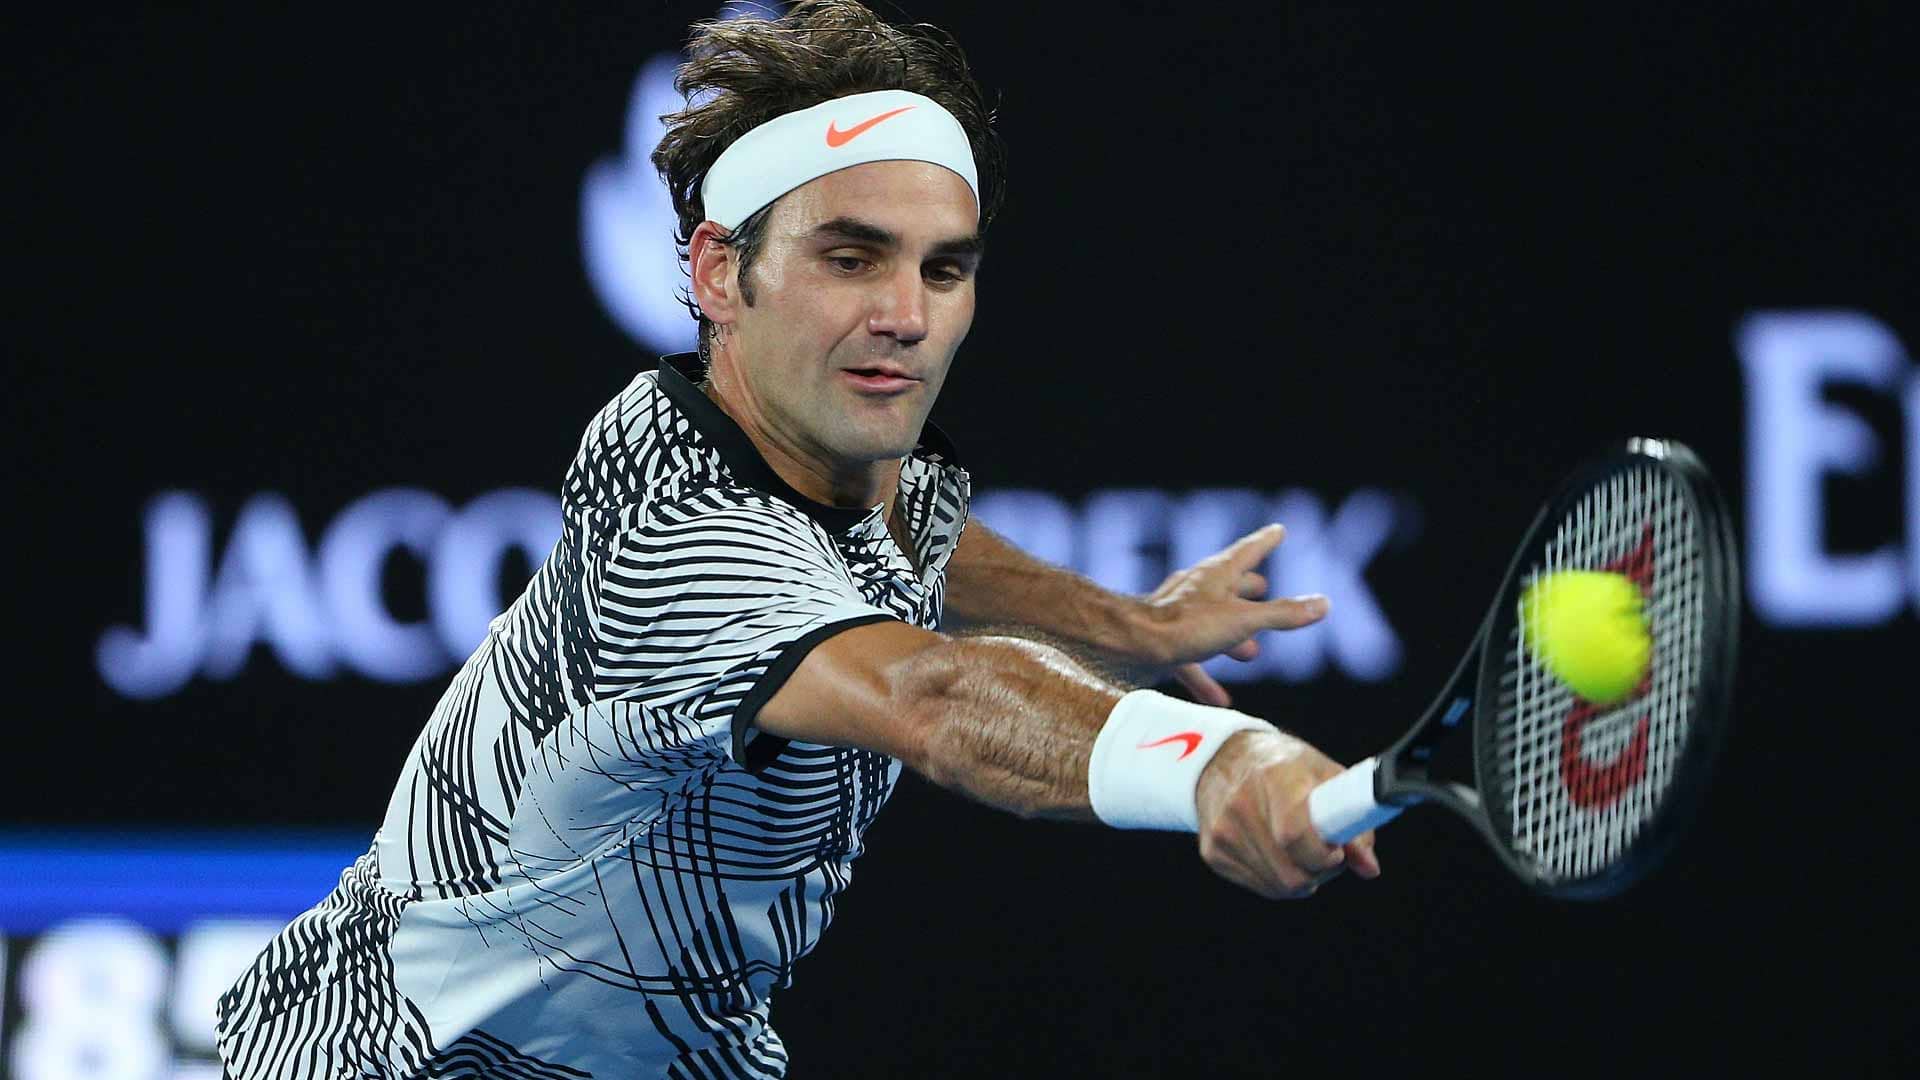 Roger Federer claims his fifth Australian Open title and first since 2010.